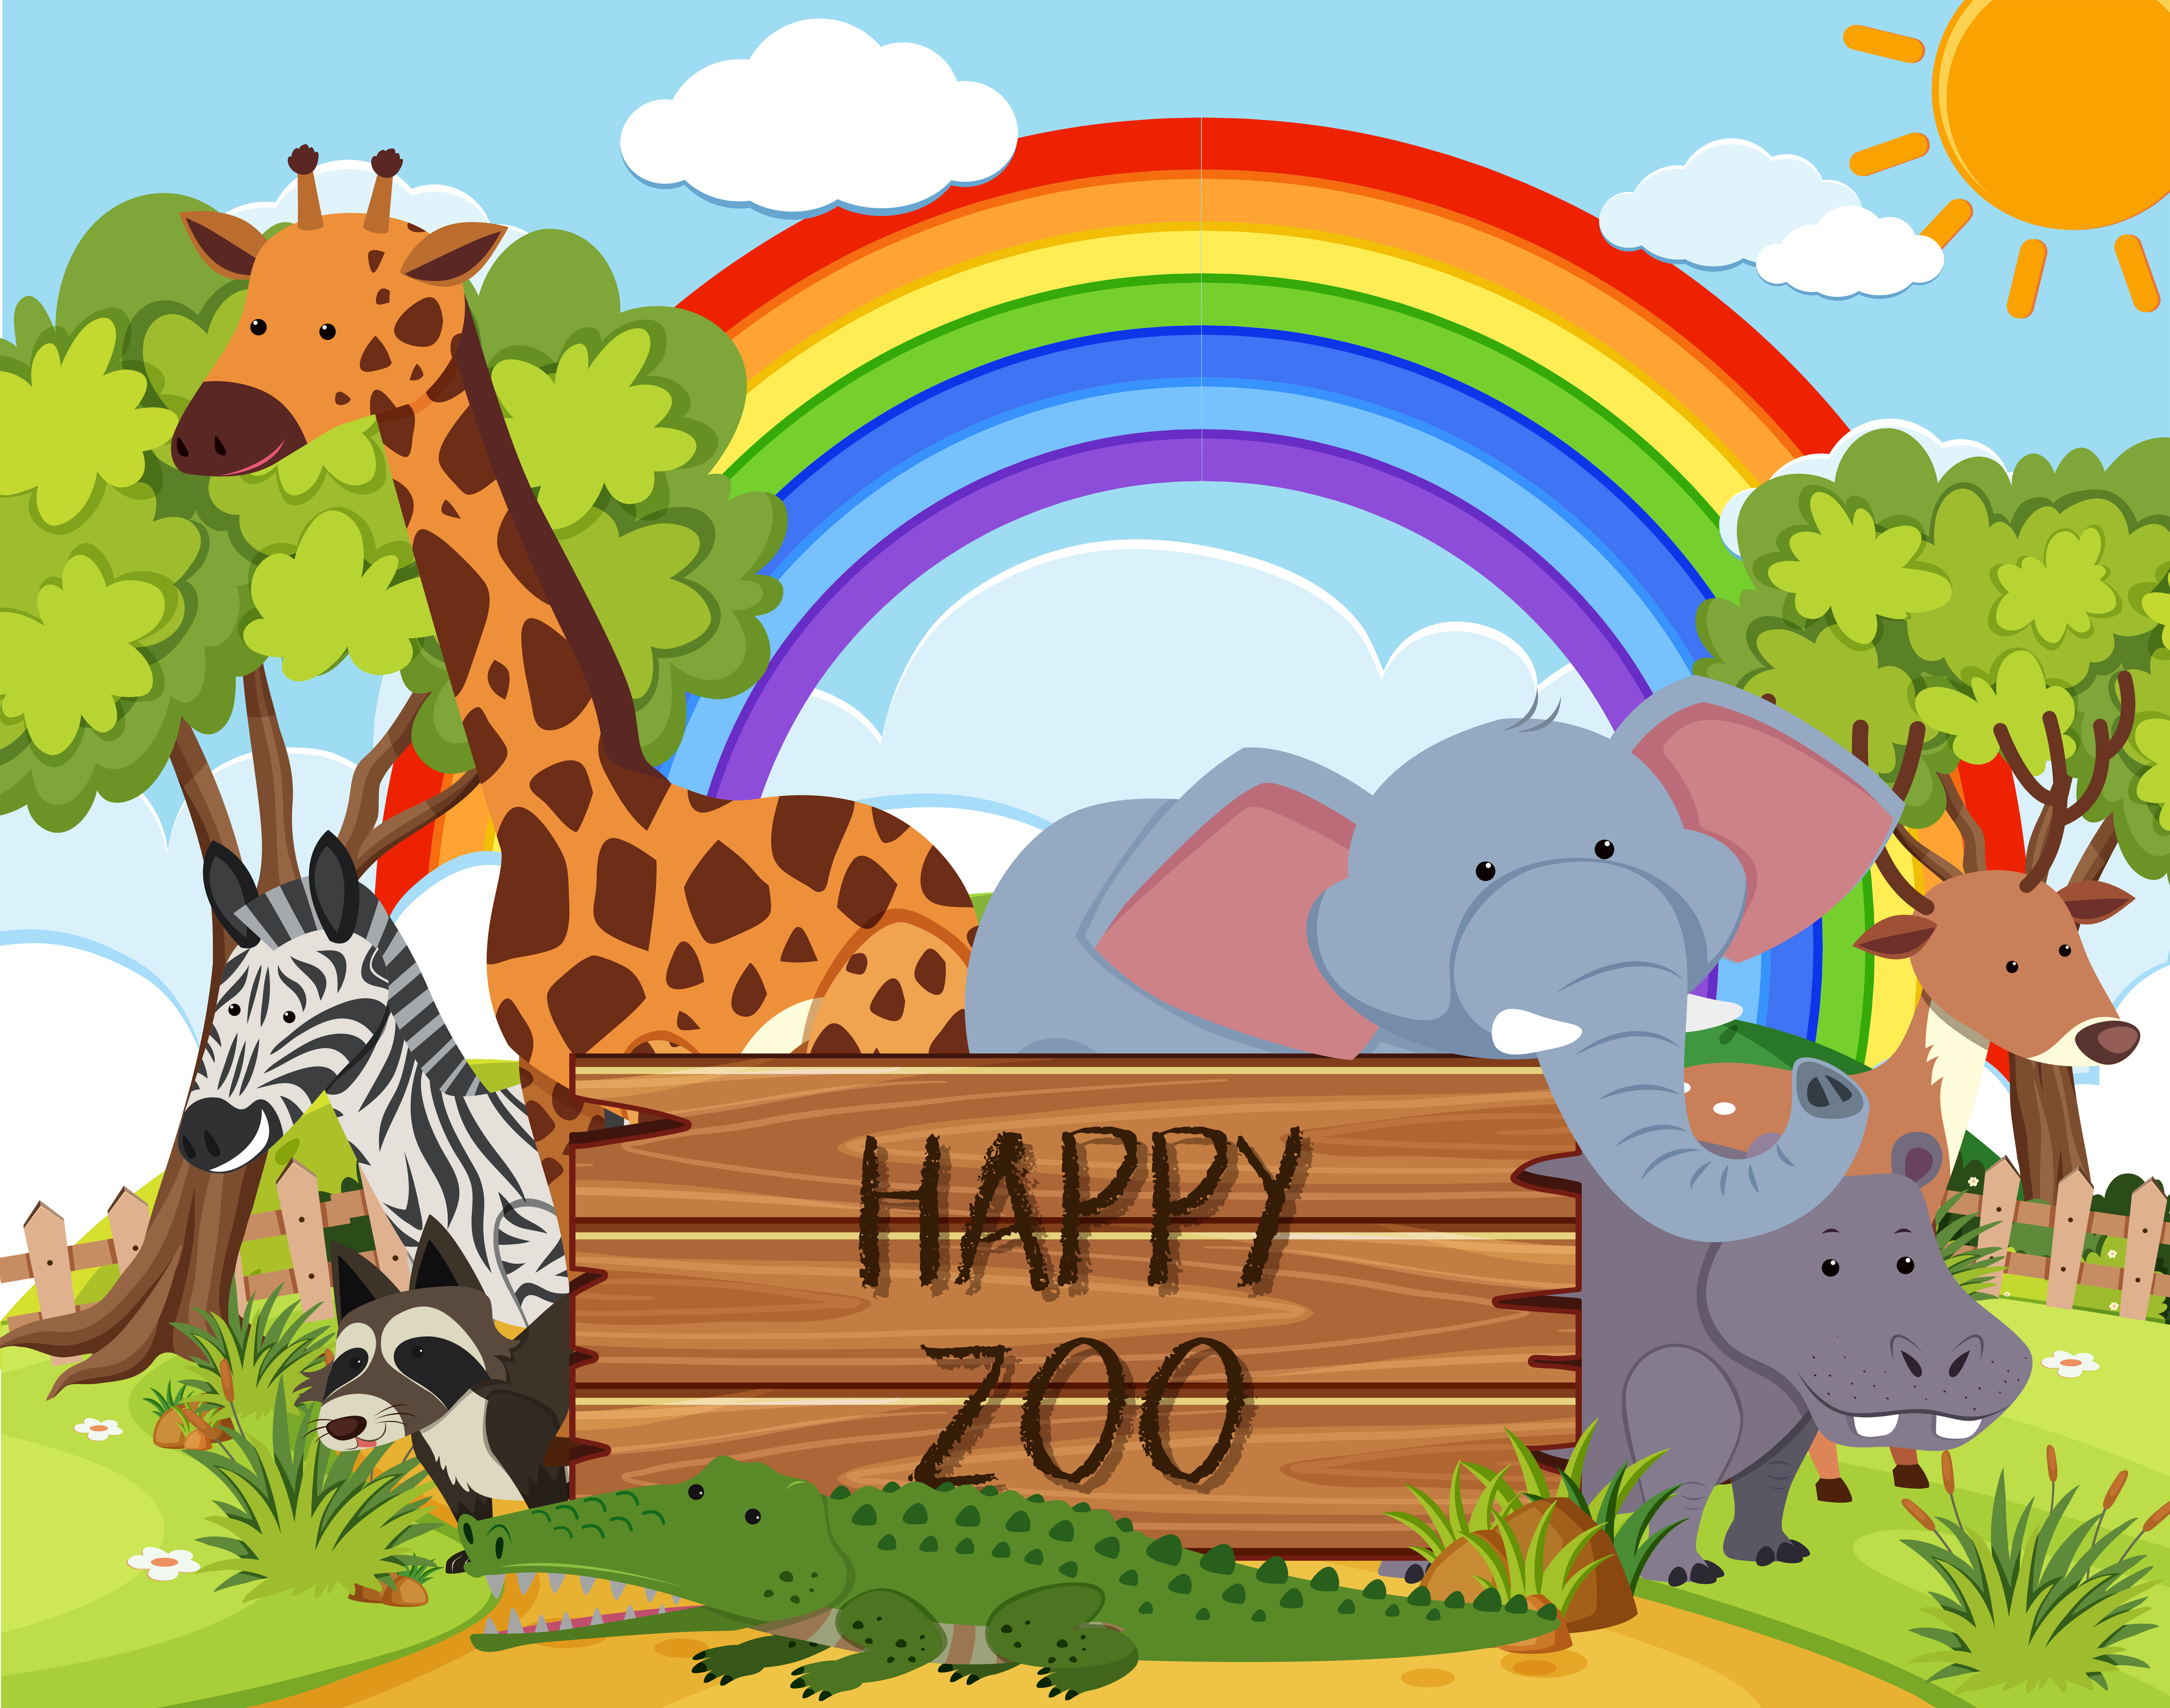 Happy Animal in the Zoo - Download Free Vectors, Clipart ...